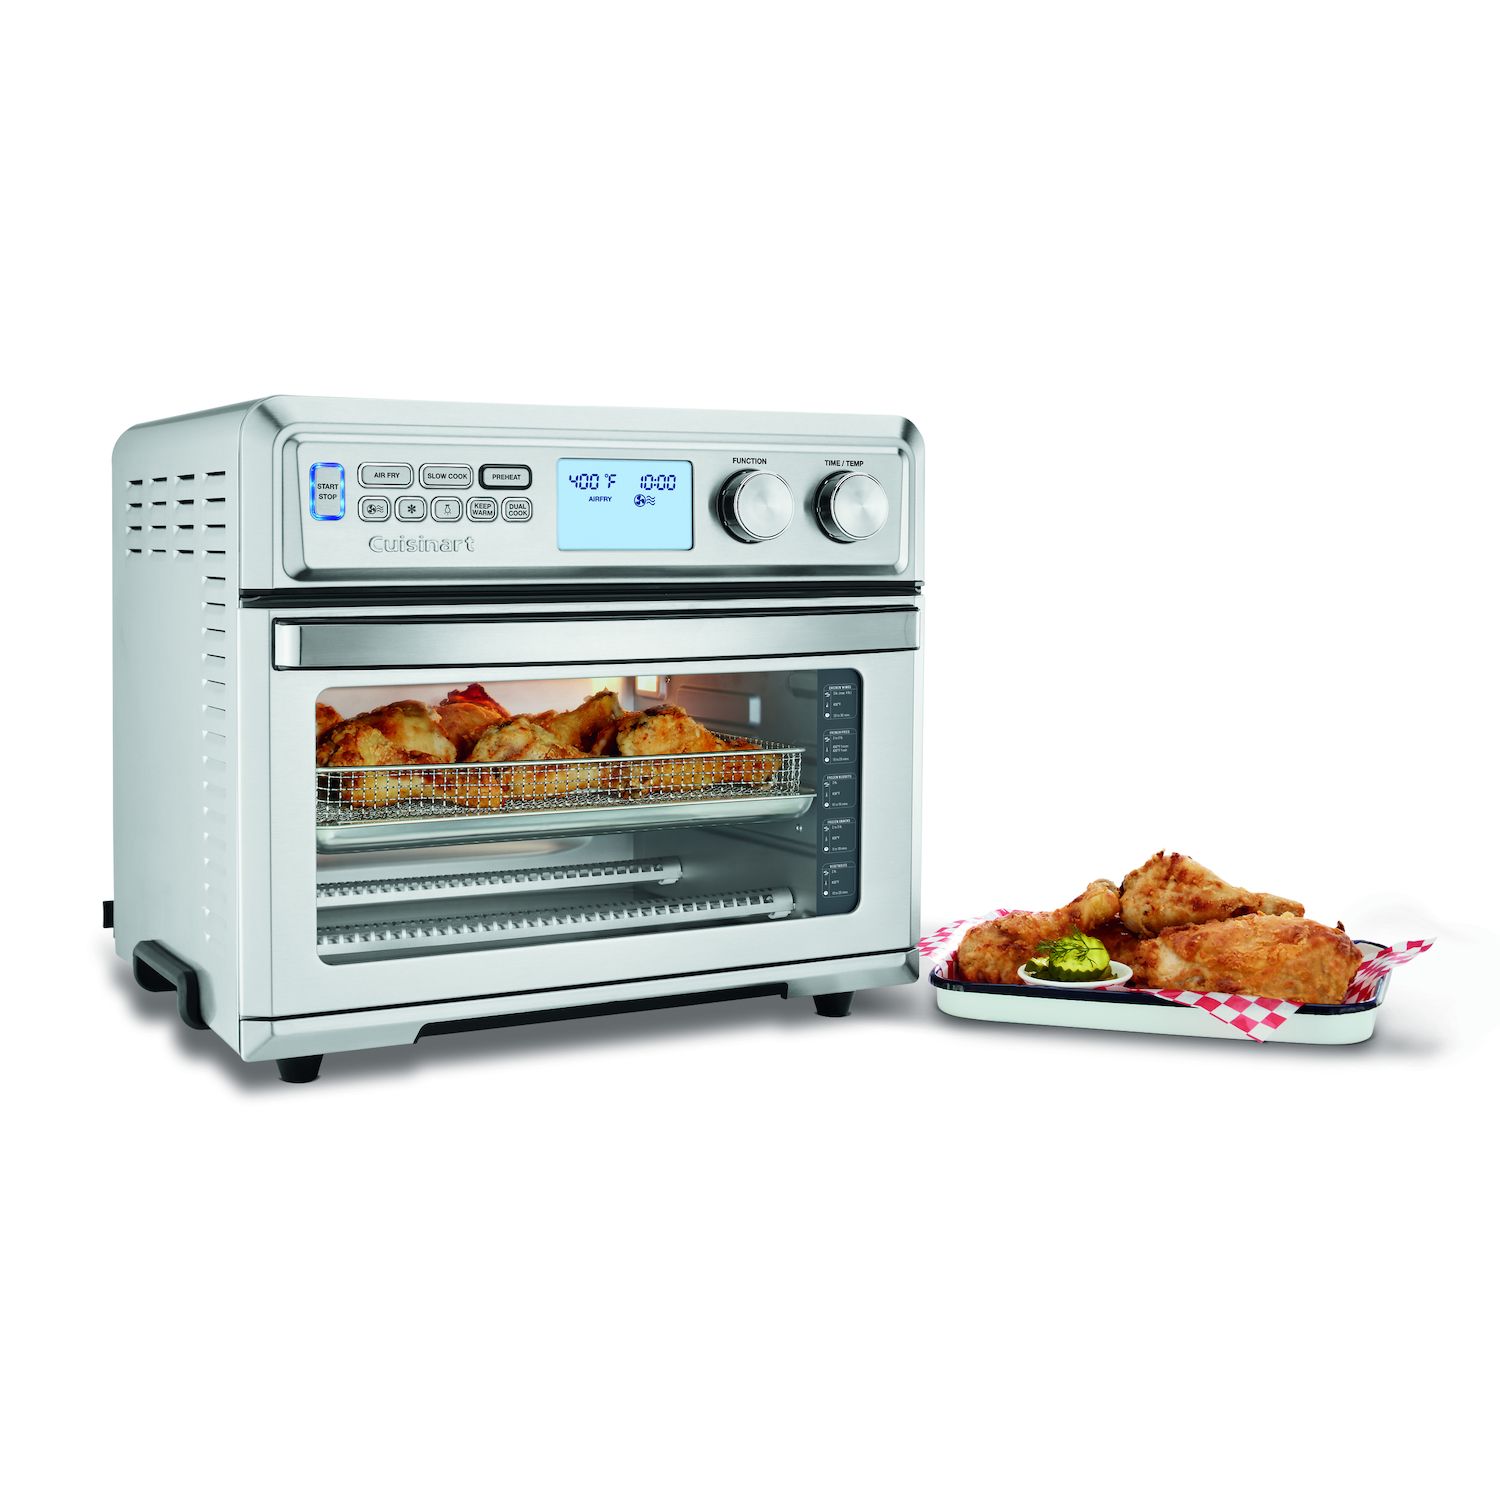 Ventray Convection Countertop Oven Master, 26qt Digital Controlled Electric Air Fryer Toaster - Silver